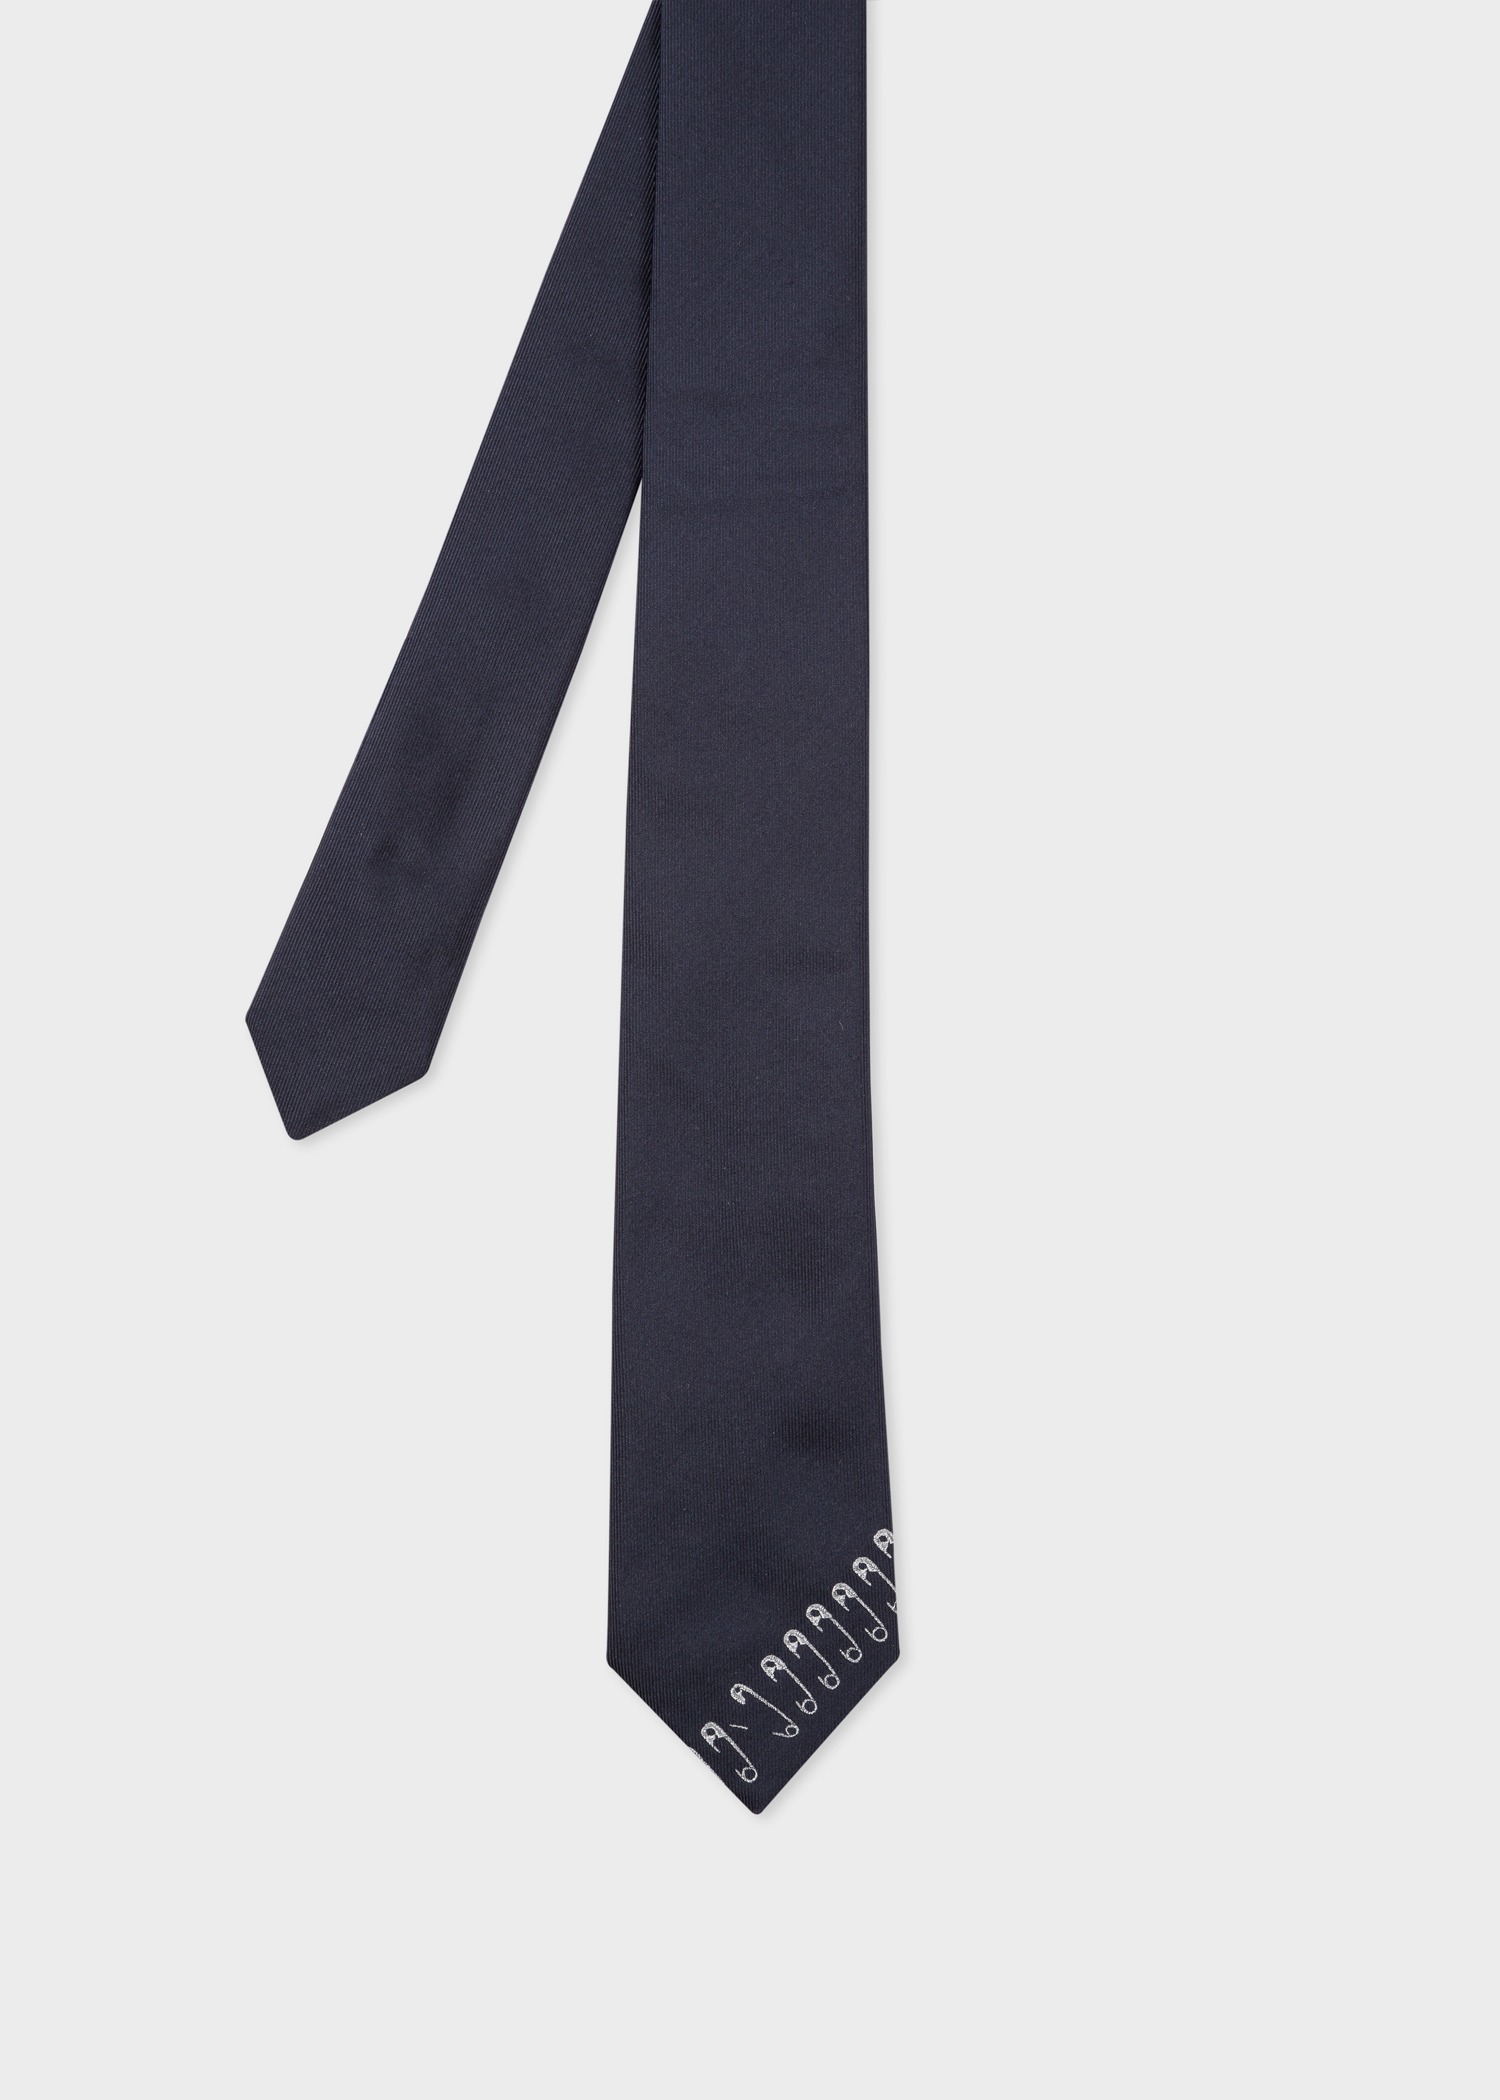 Front view - Men's Dark Navy Narrow Silk Tie With 'Safety Pins' Print Paul Smith